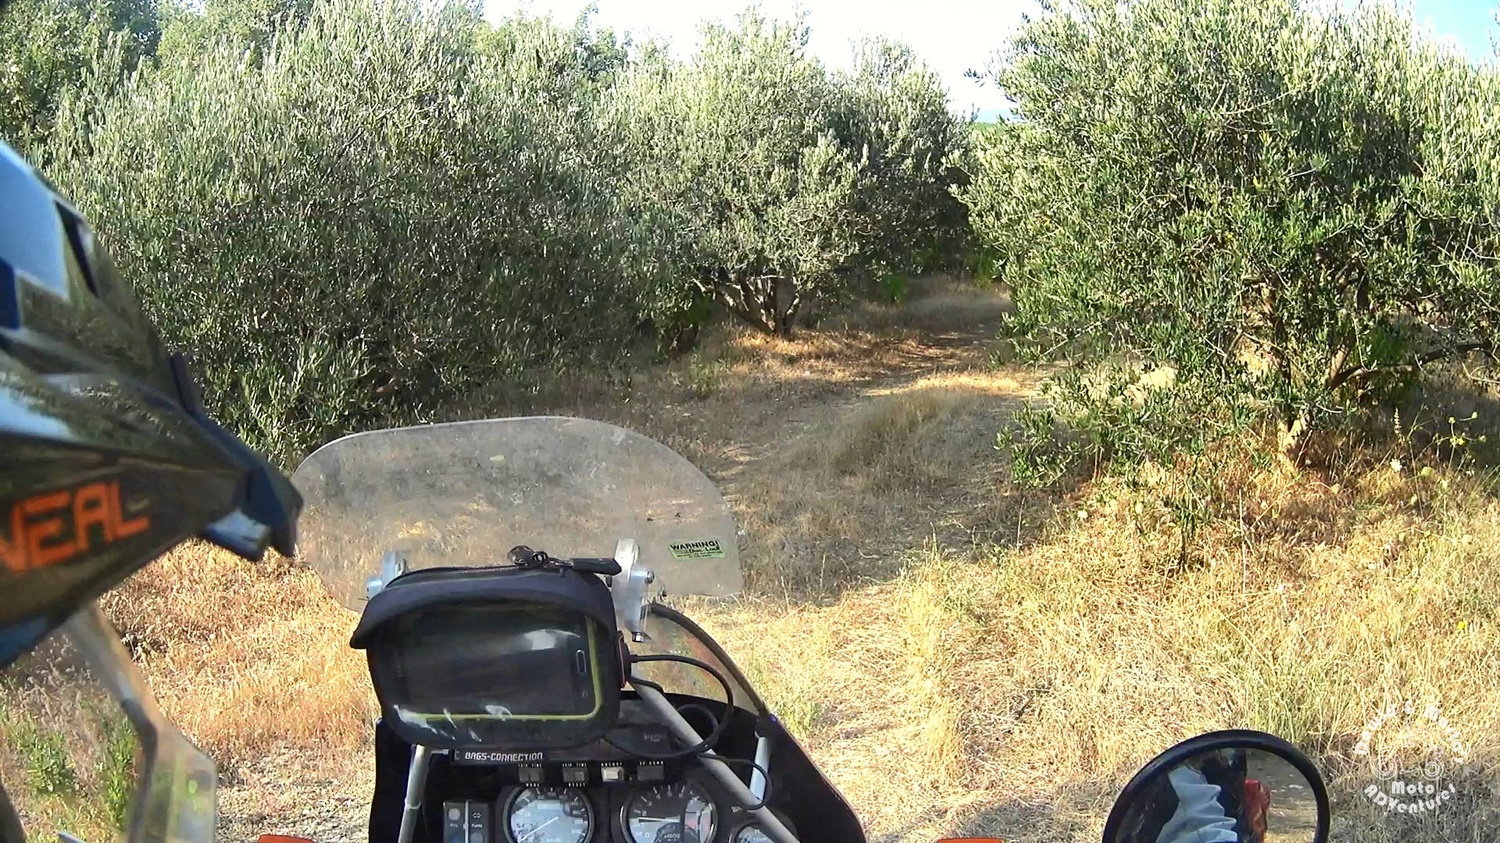 Riding the motorcycle in the olive grove